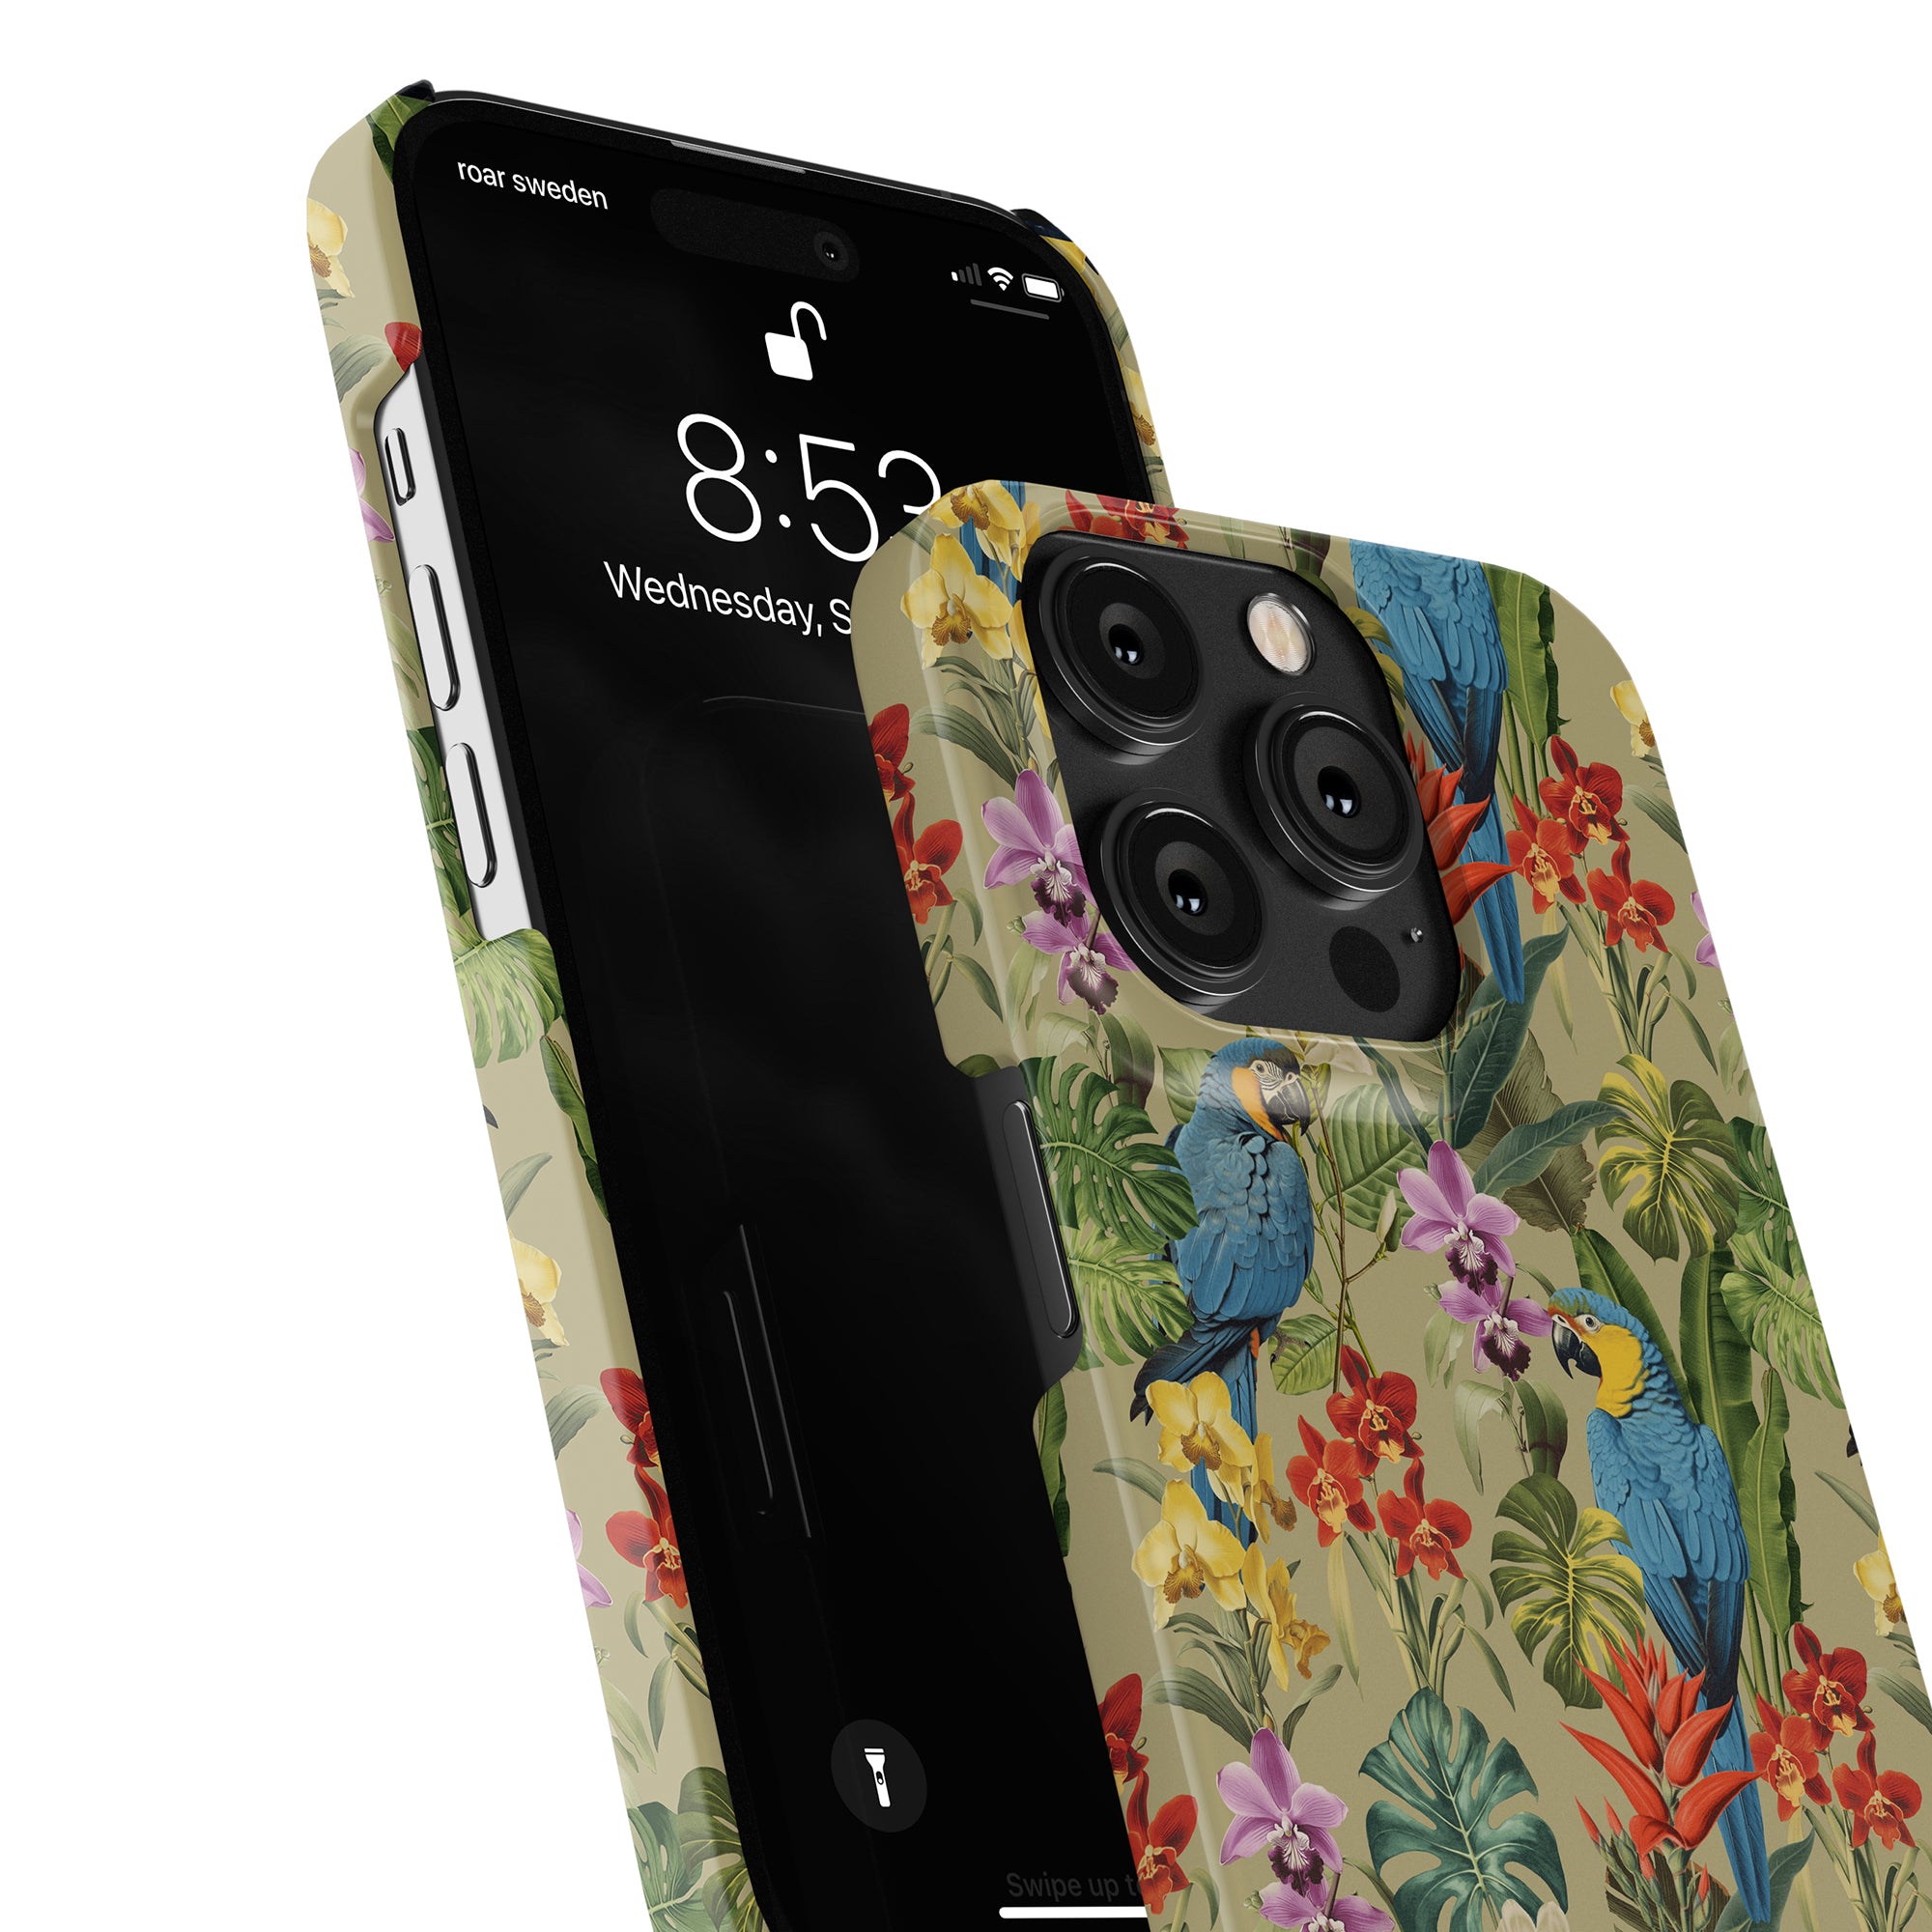 A smartphone in a Verdant Beauty - Slim case from the Birds Collection, featuring a colorful floral and parrot-themed design, displays the time as 8:53 along with the date Wednesday, September 13.